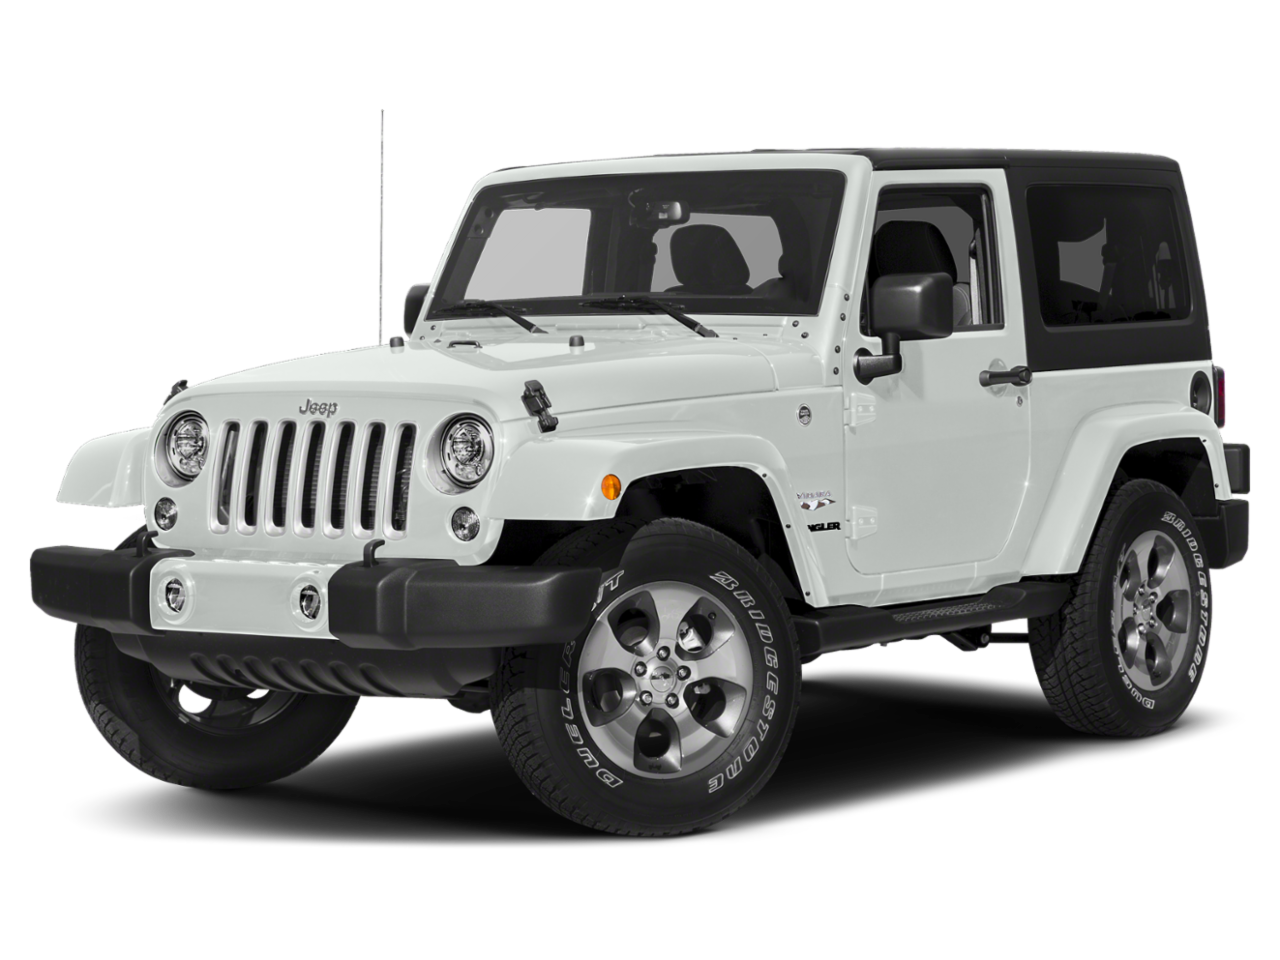 2017 Jeep Wrangler Repair: Service and Maintenance Cost